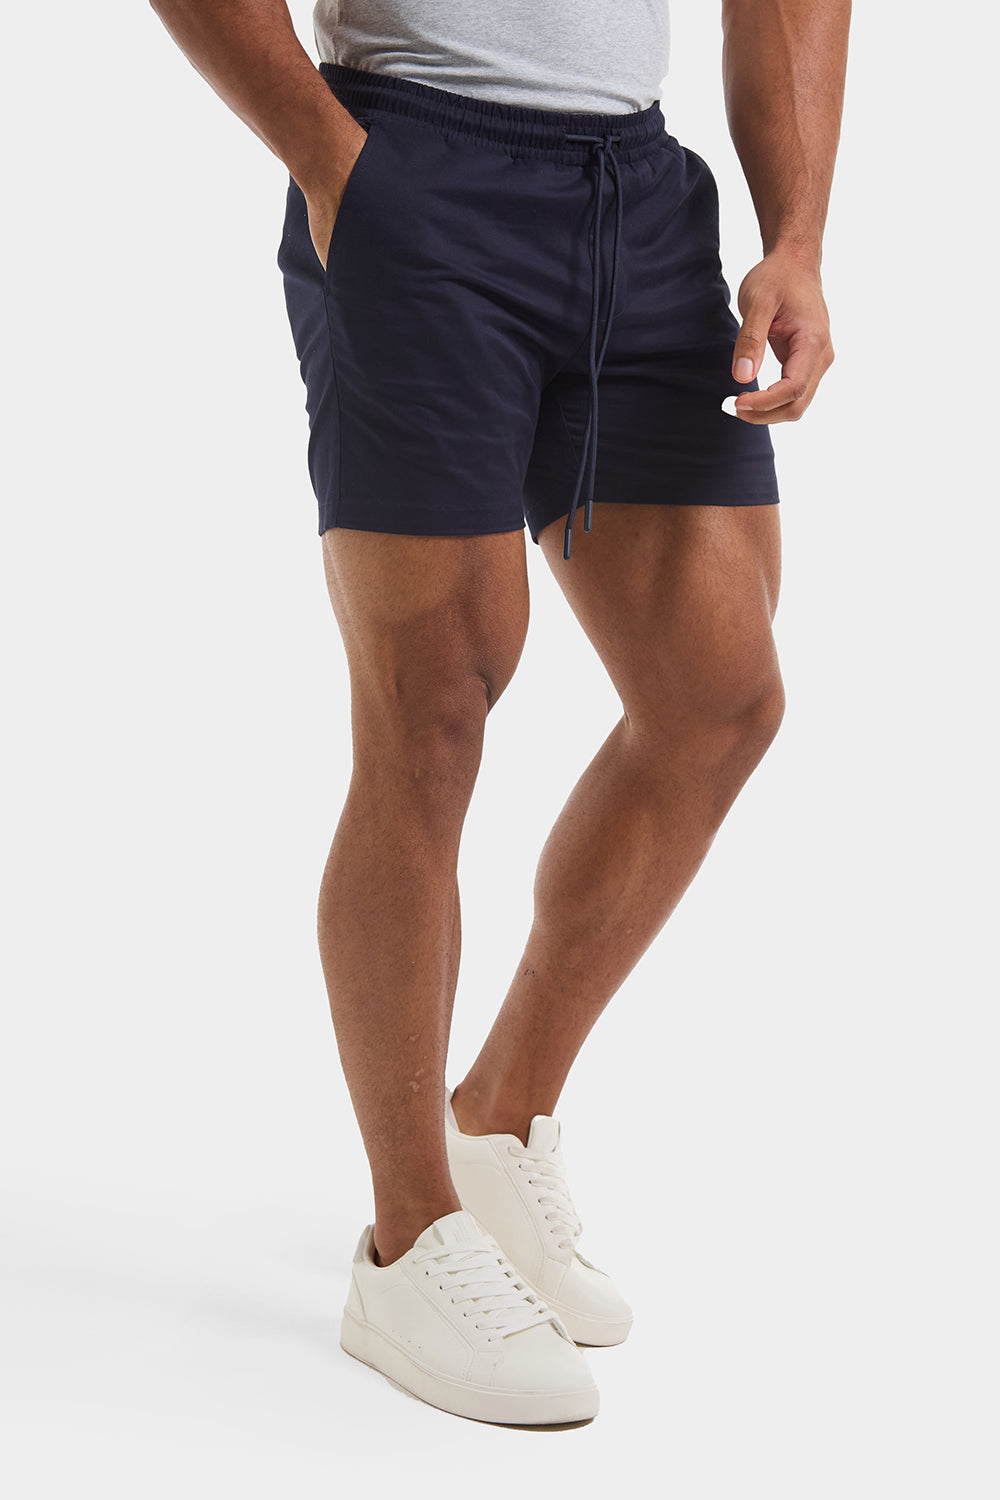 Muscle Fit Drawstring Chino Short - Shorter Length in Navy - TAILORED ATHLETE - ROW